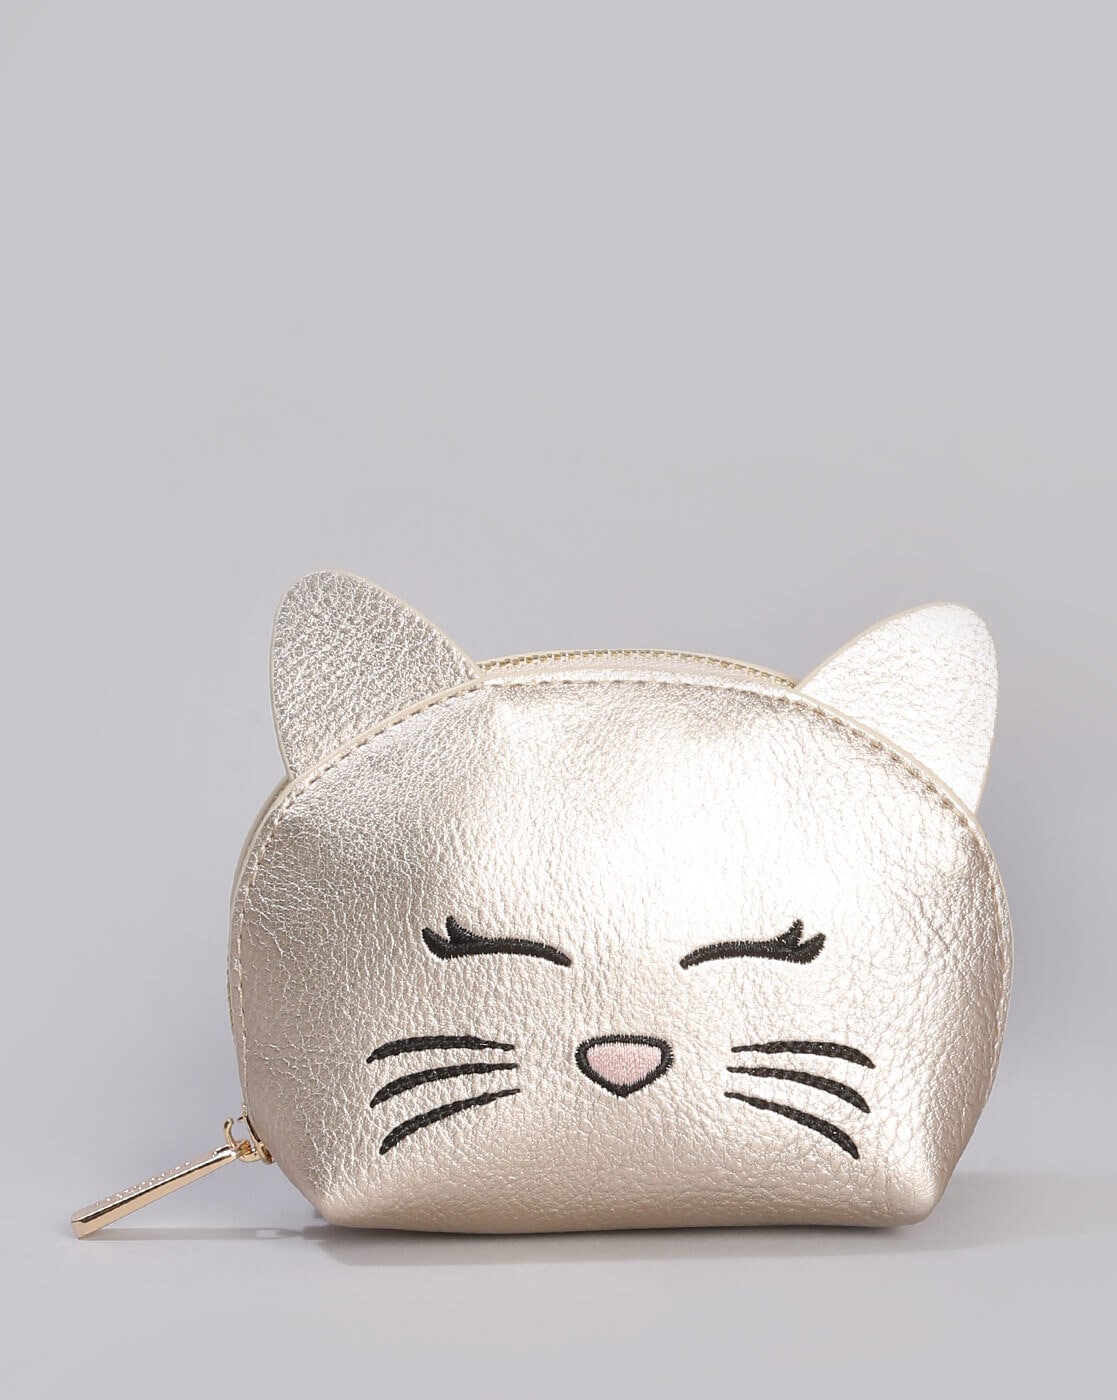 Mini 3D Cat Bag With Animal Face Purse, Coin Purge, Makeup Travel Handbag,  Clutch Pouch, And Phone Holder Available In For Kids From Mandystore2009,  $1.22 | DHgate.Com